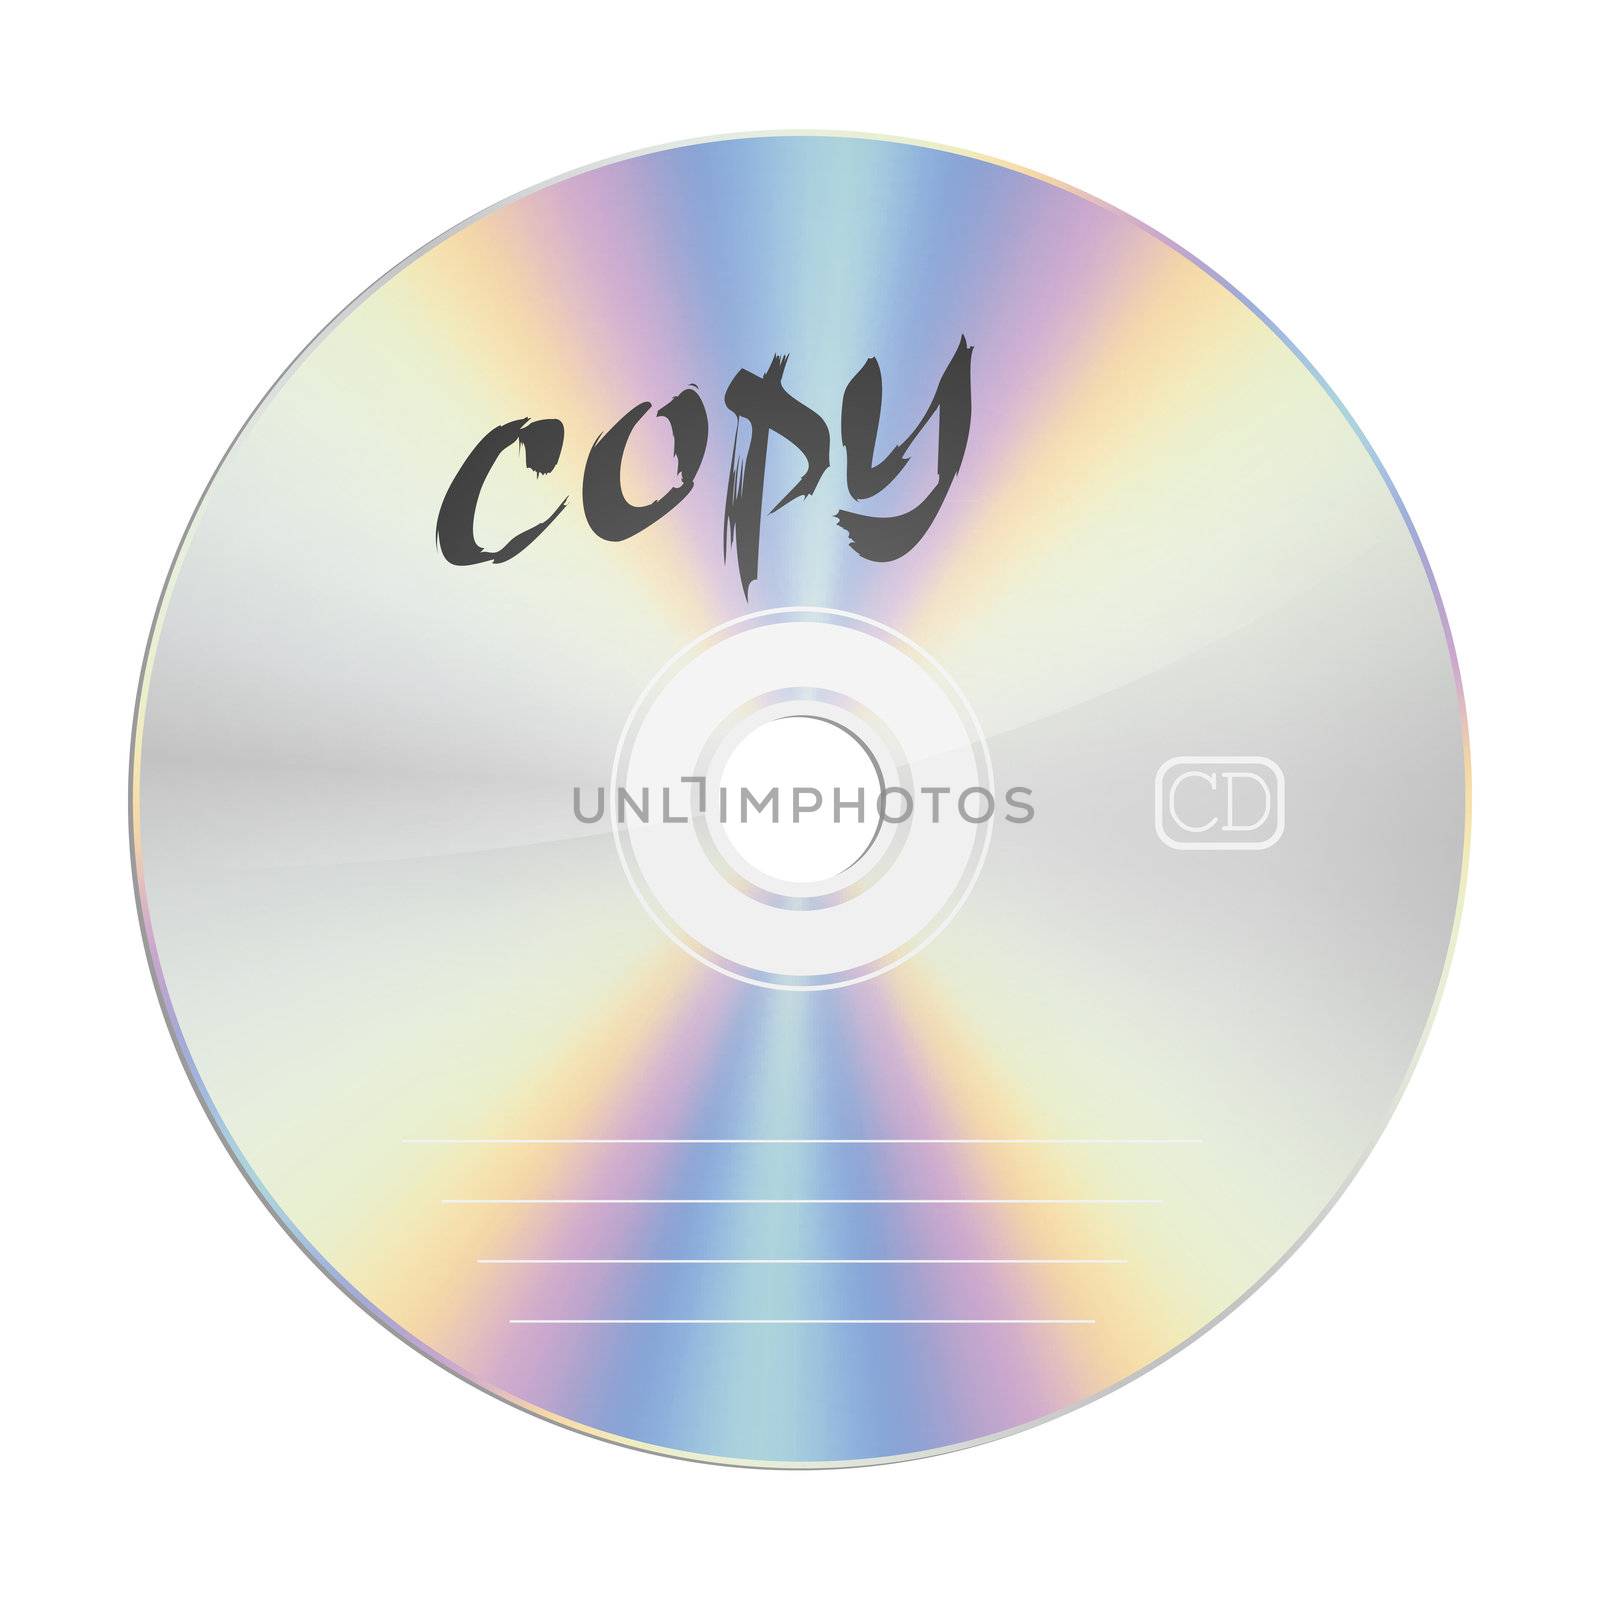 An image of a security compact disc copy